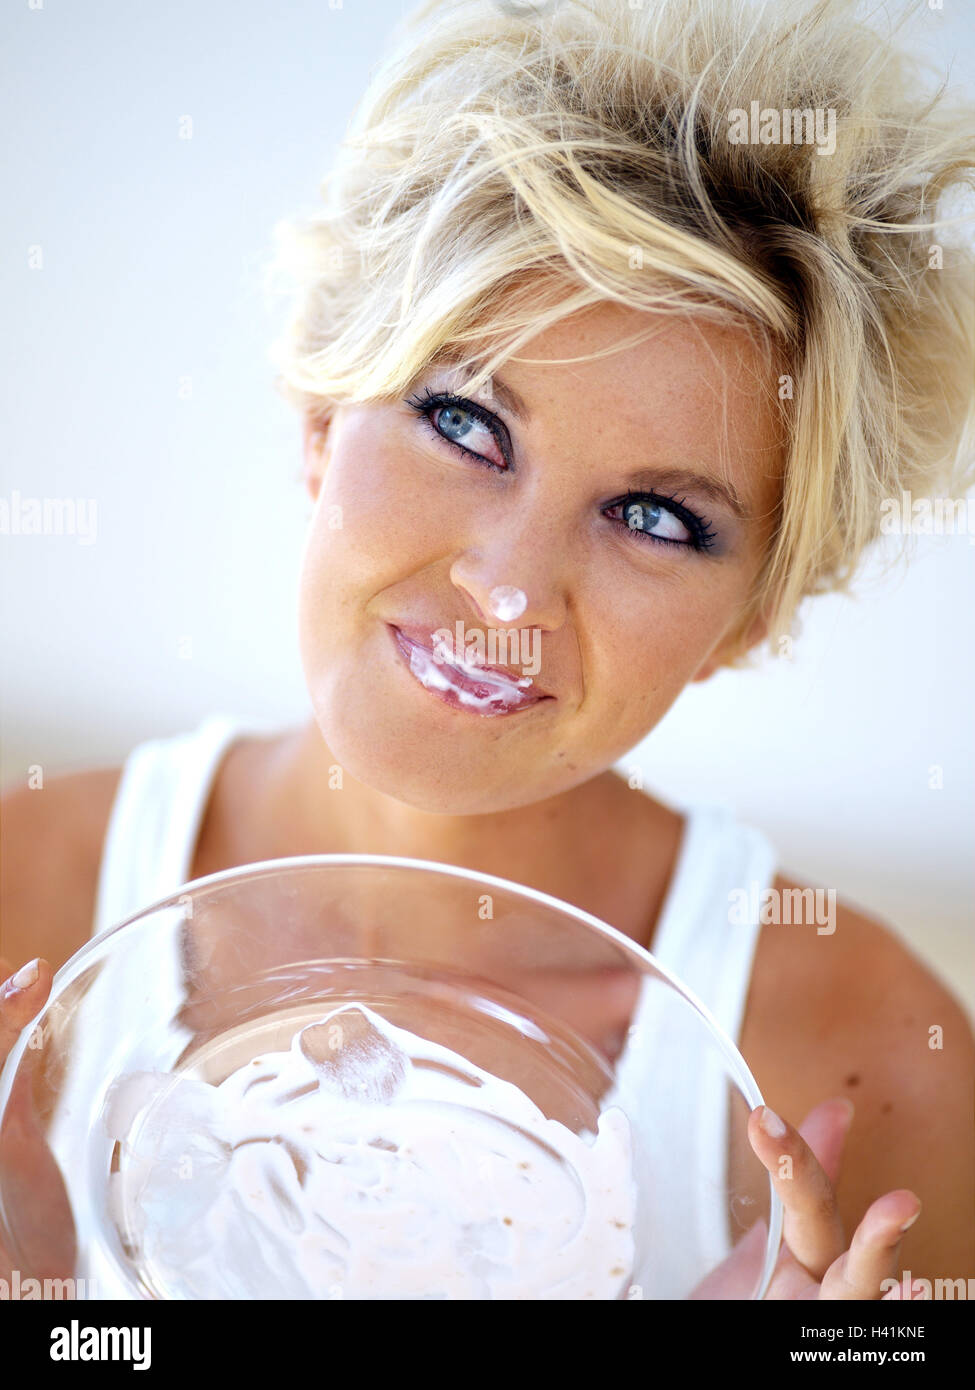 Woman, young, blond, cheerfully, sidelong glance, Plates, licks, face stains, Portrait short-haired, hairdo, strubbelig, Strubelkopf, eye color blue, made up, makeup, Top, summery, mood, positively, high-looks, looks up, happily, cheerfully, impudently, a Stock Photo